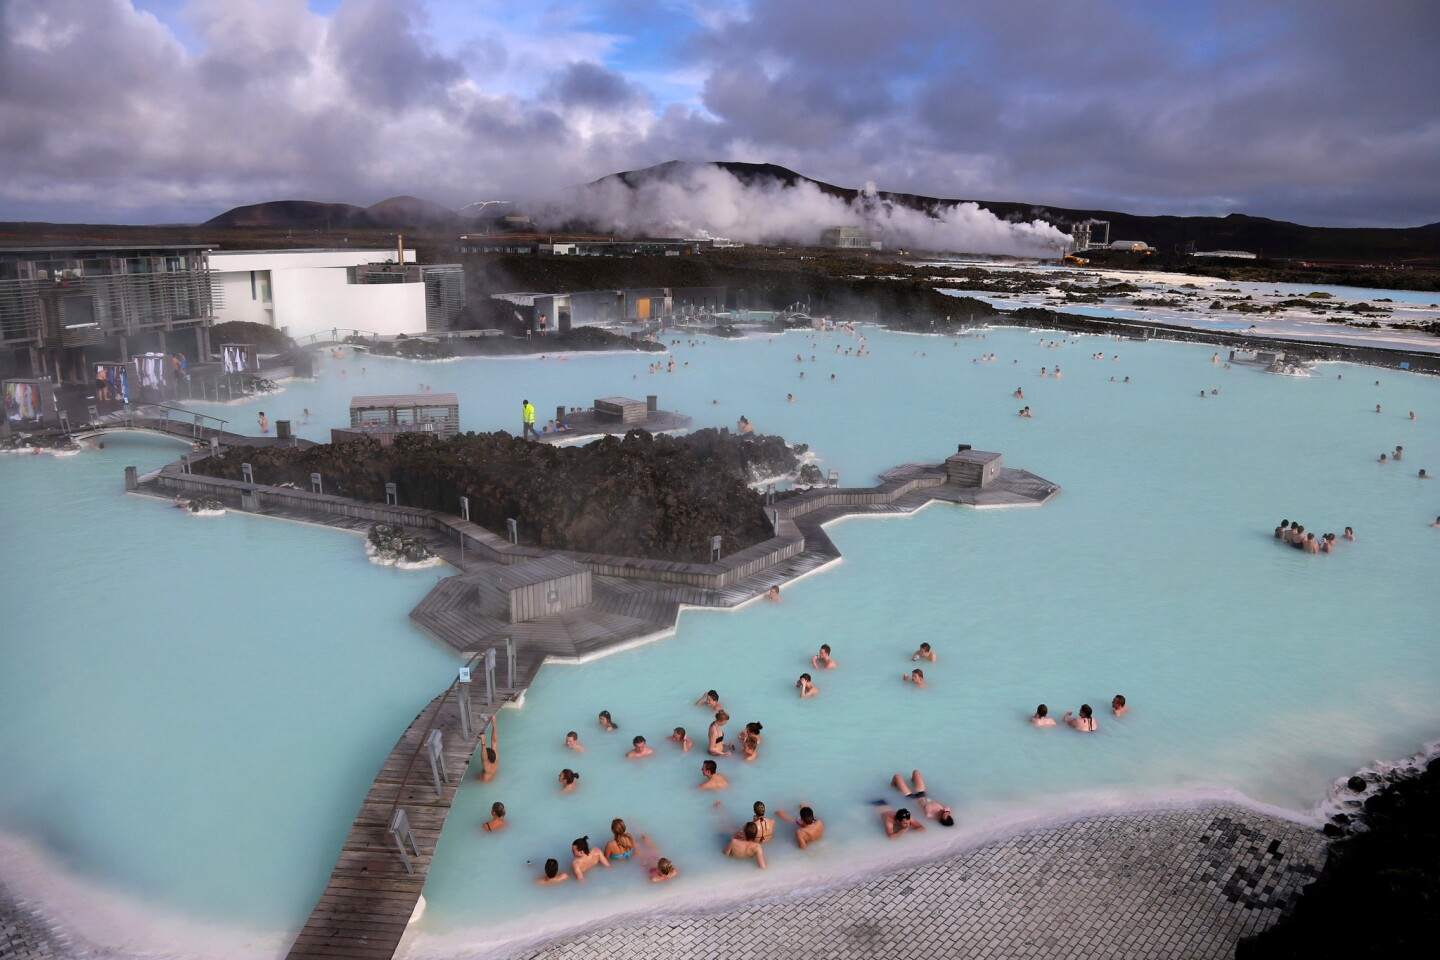 Visitors sit in the geothermal waters at the Blue Lagoon close to the Icelandic capital of Reykjavik.